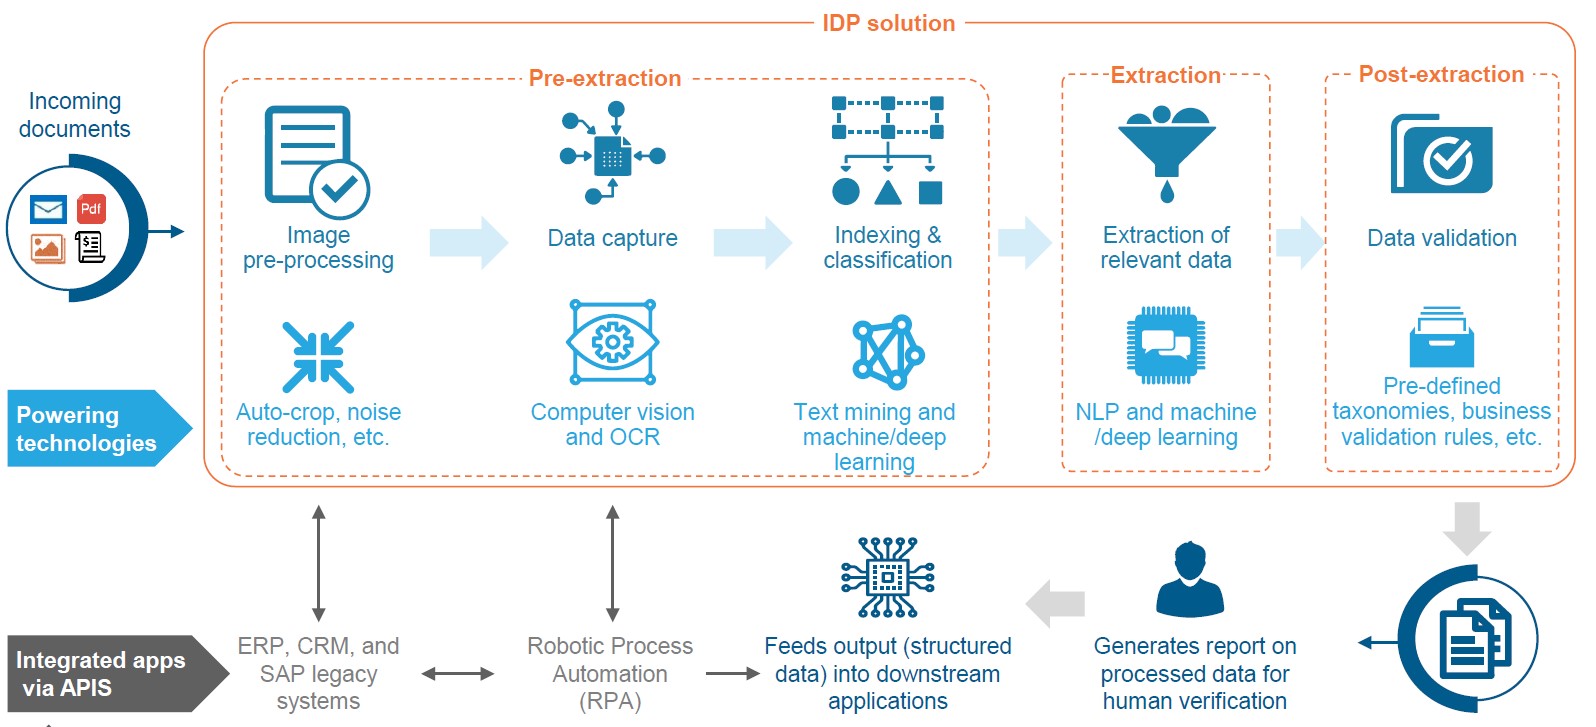 IDP versus OCR: making data processing smarter with AI/ML capabilities